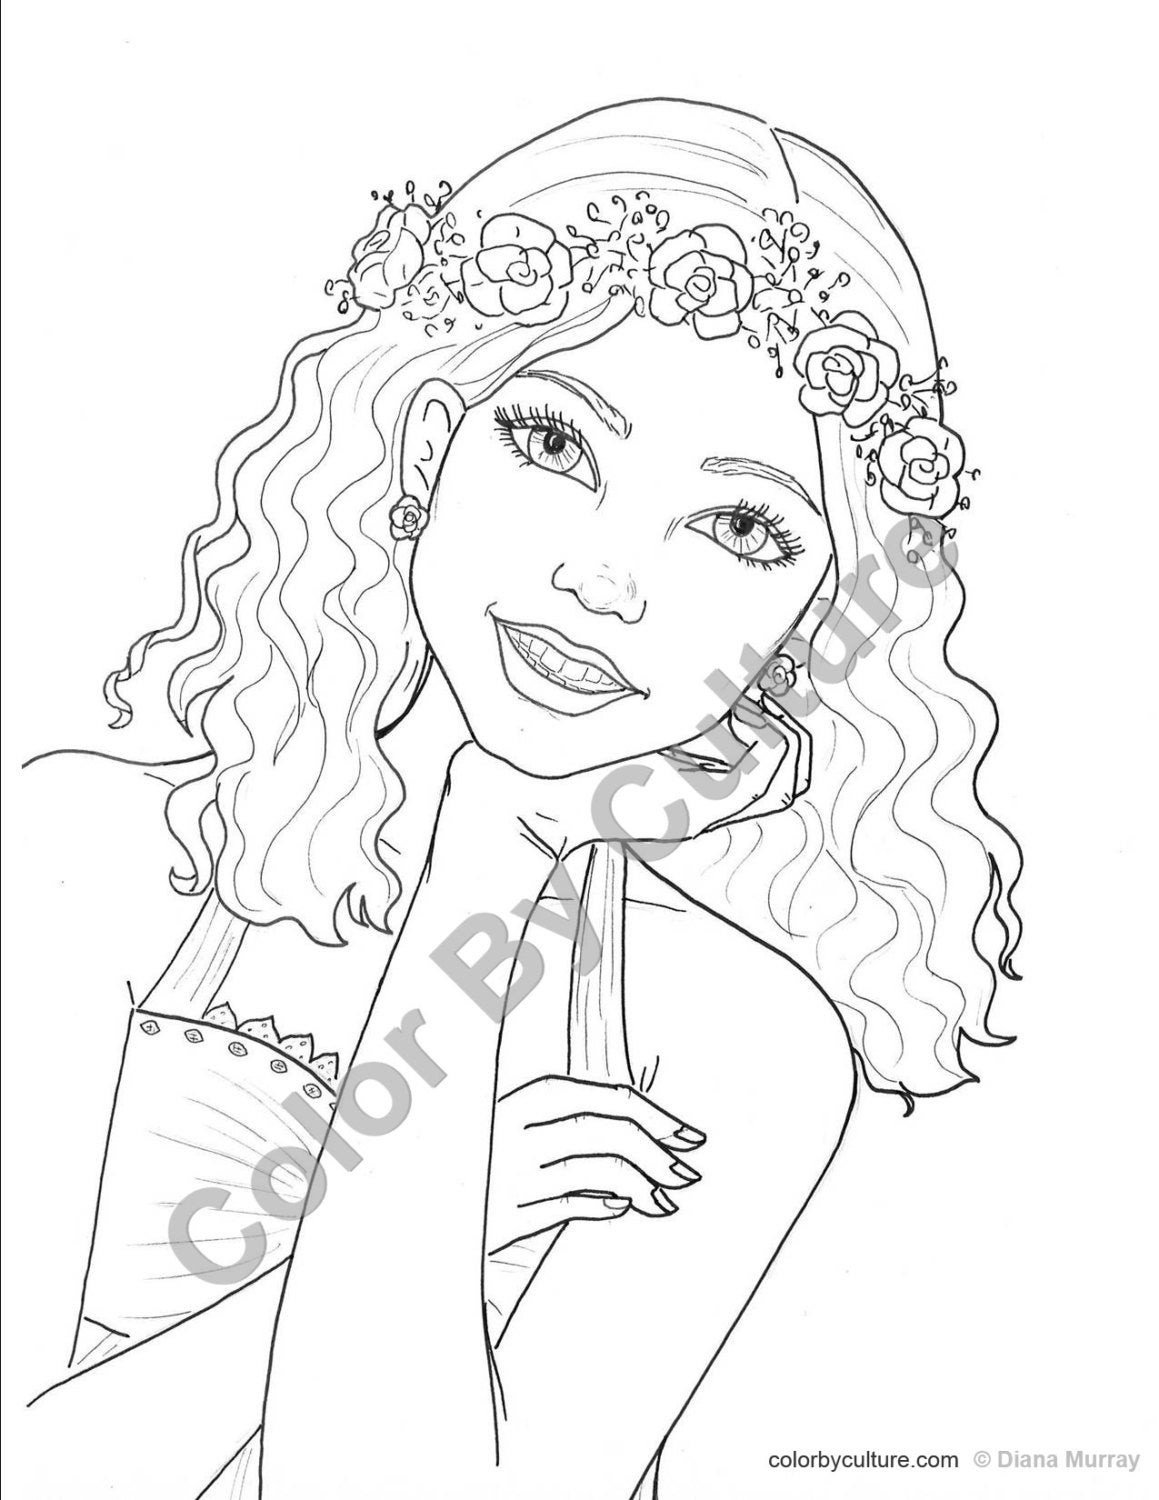 Coloring Book Pages For Teenage Girls
 Fashion Coloring Page Girl with Flower Wreath Coloring Page